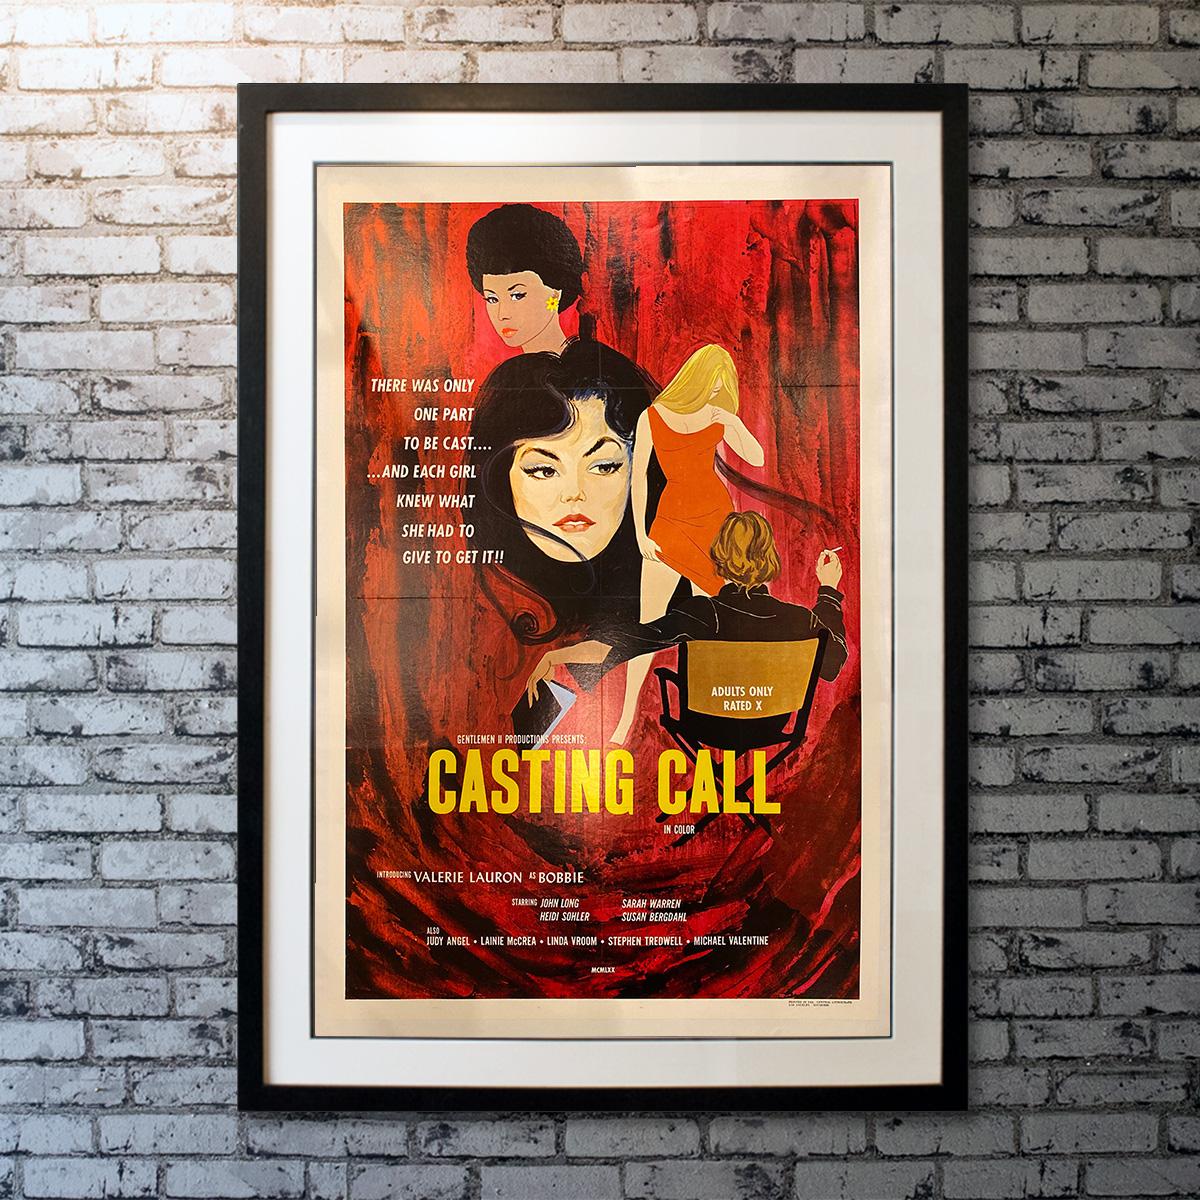 This is an original US one-sheet poster of Casting Call from 1970.

Linen backing: £250